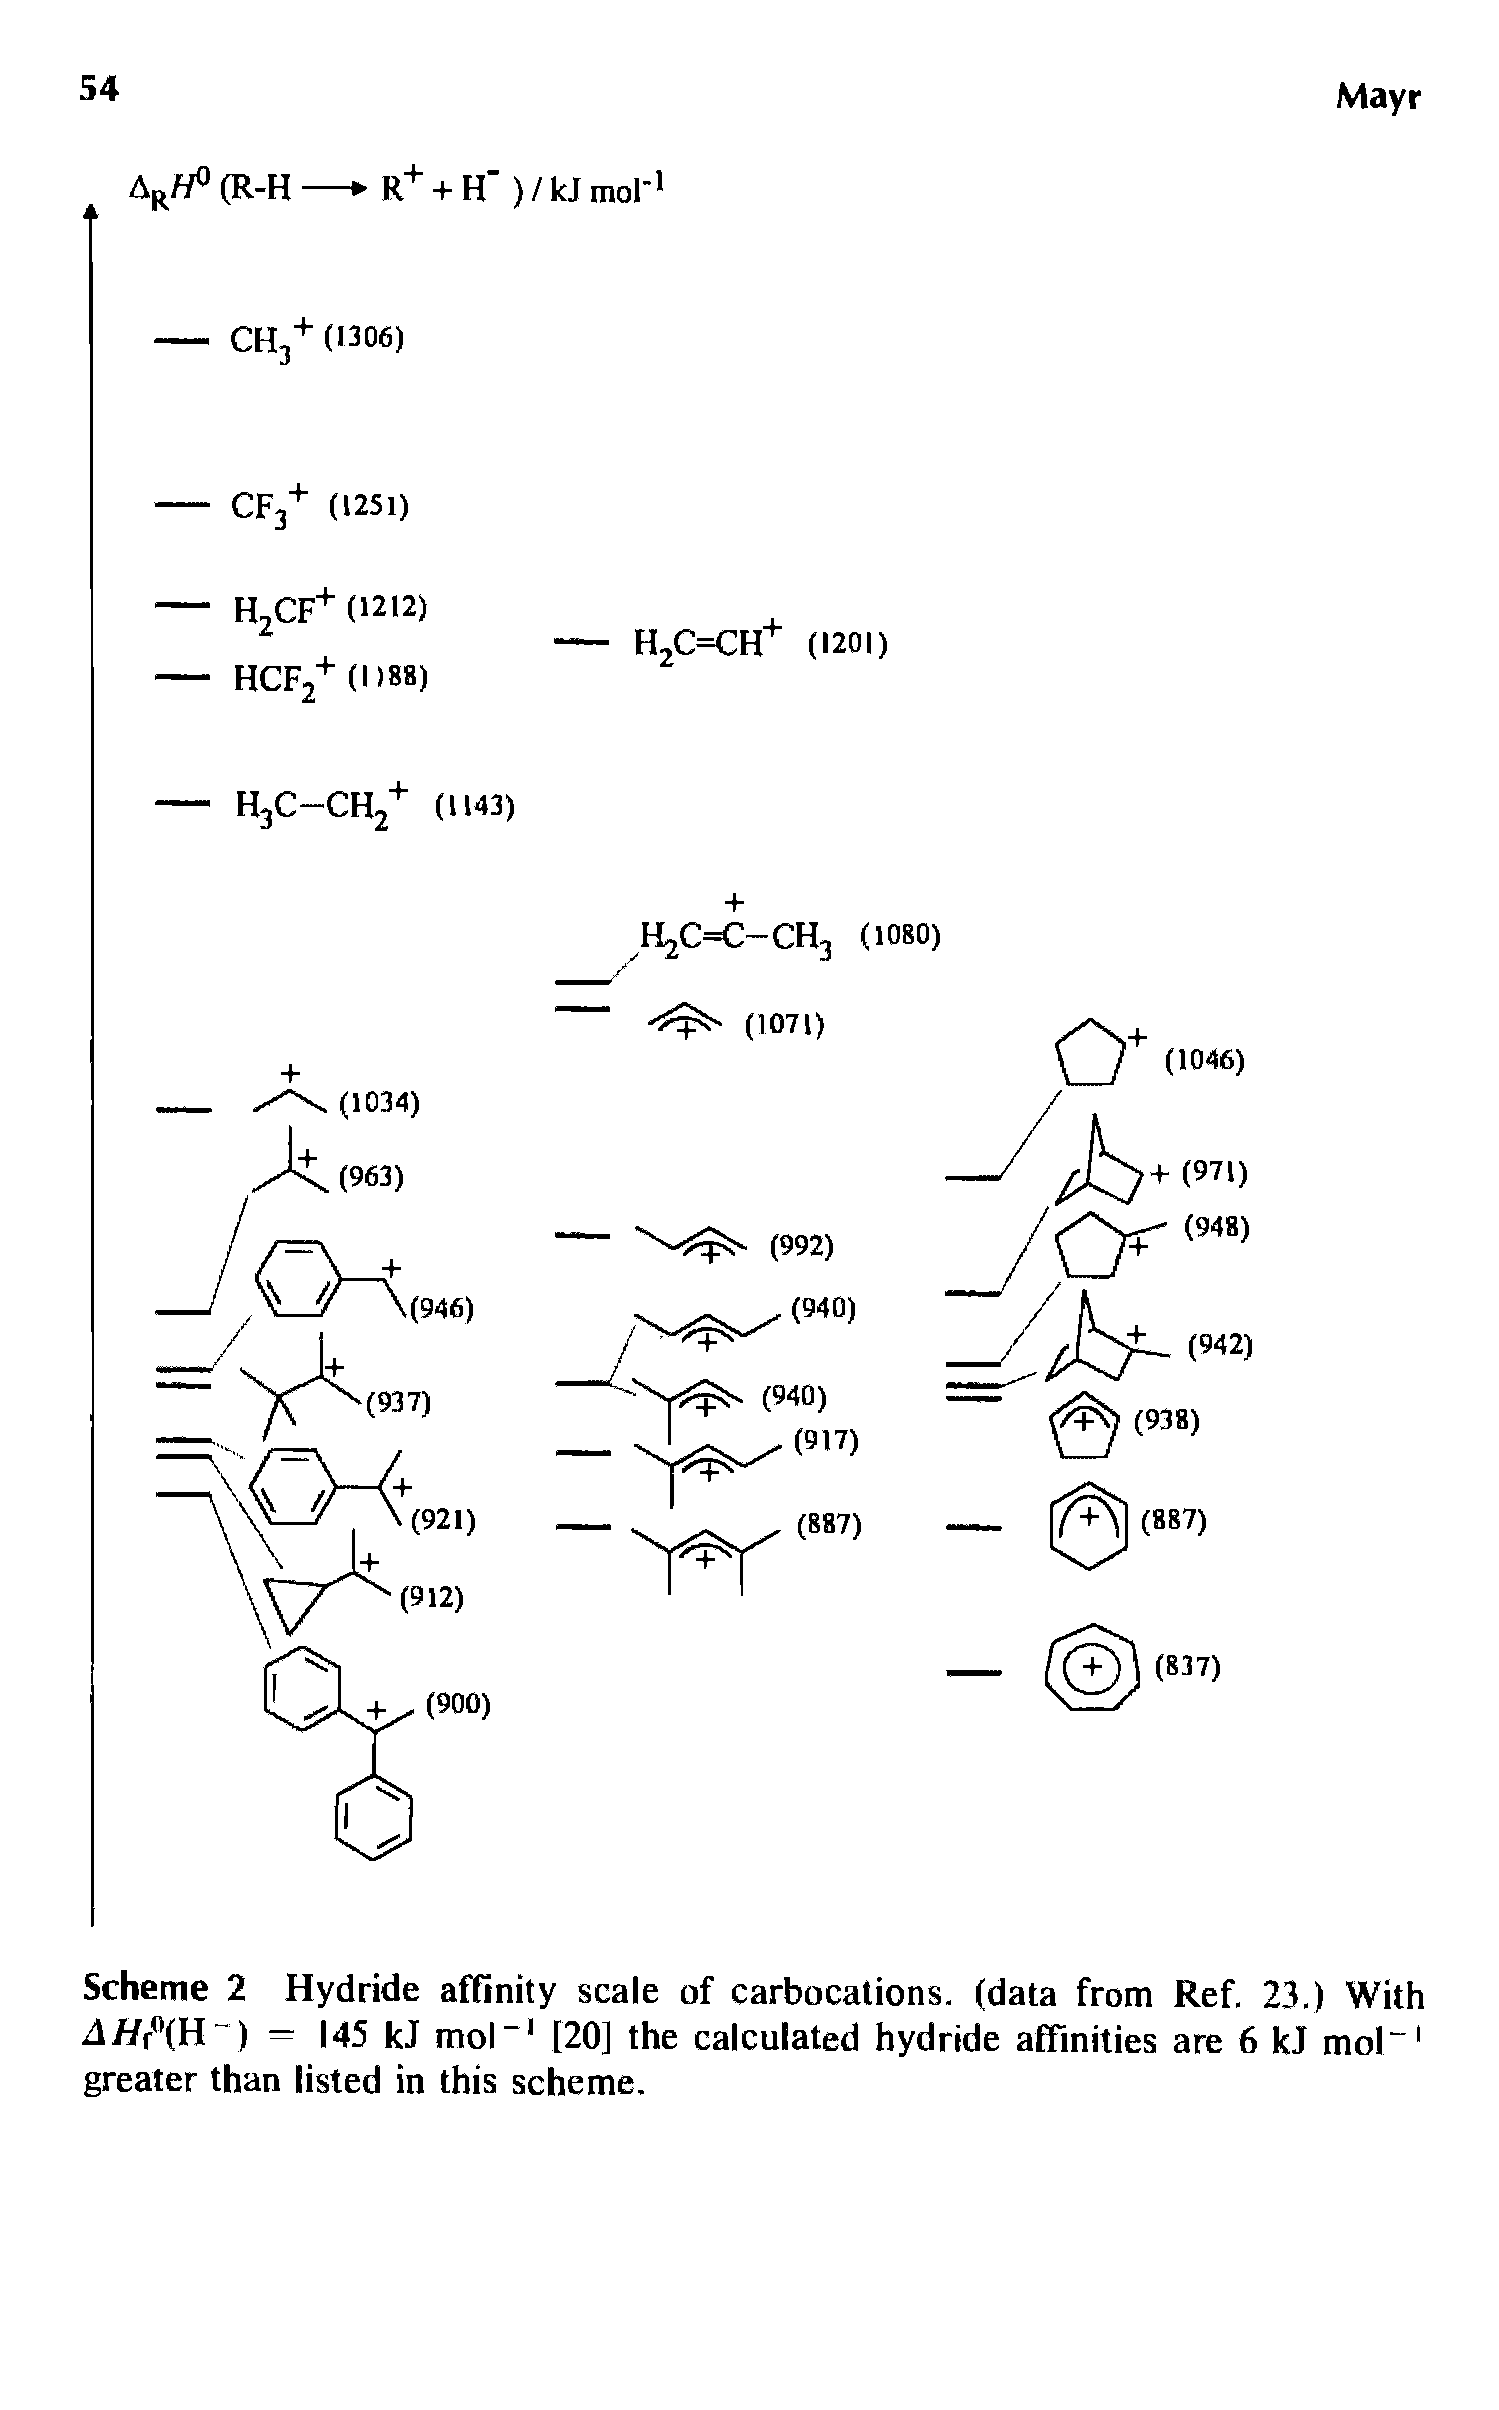 Scheme 2 Hydride affinity scale of carbocations. (data from Ref. 23.) With //r°(H ) = 145 kJ mol-1 [20] the calculated hydride affinities are 6 kJ mol-1 greater than listed in this scheme.